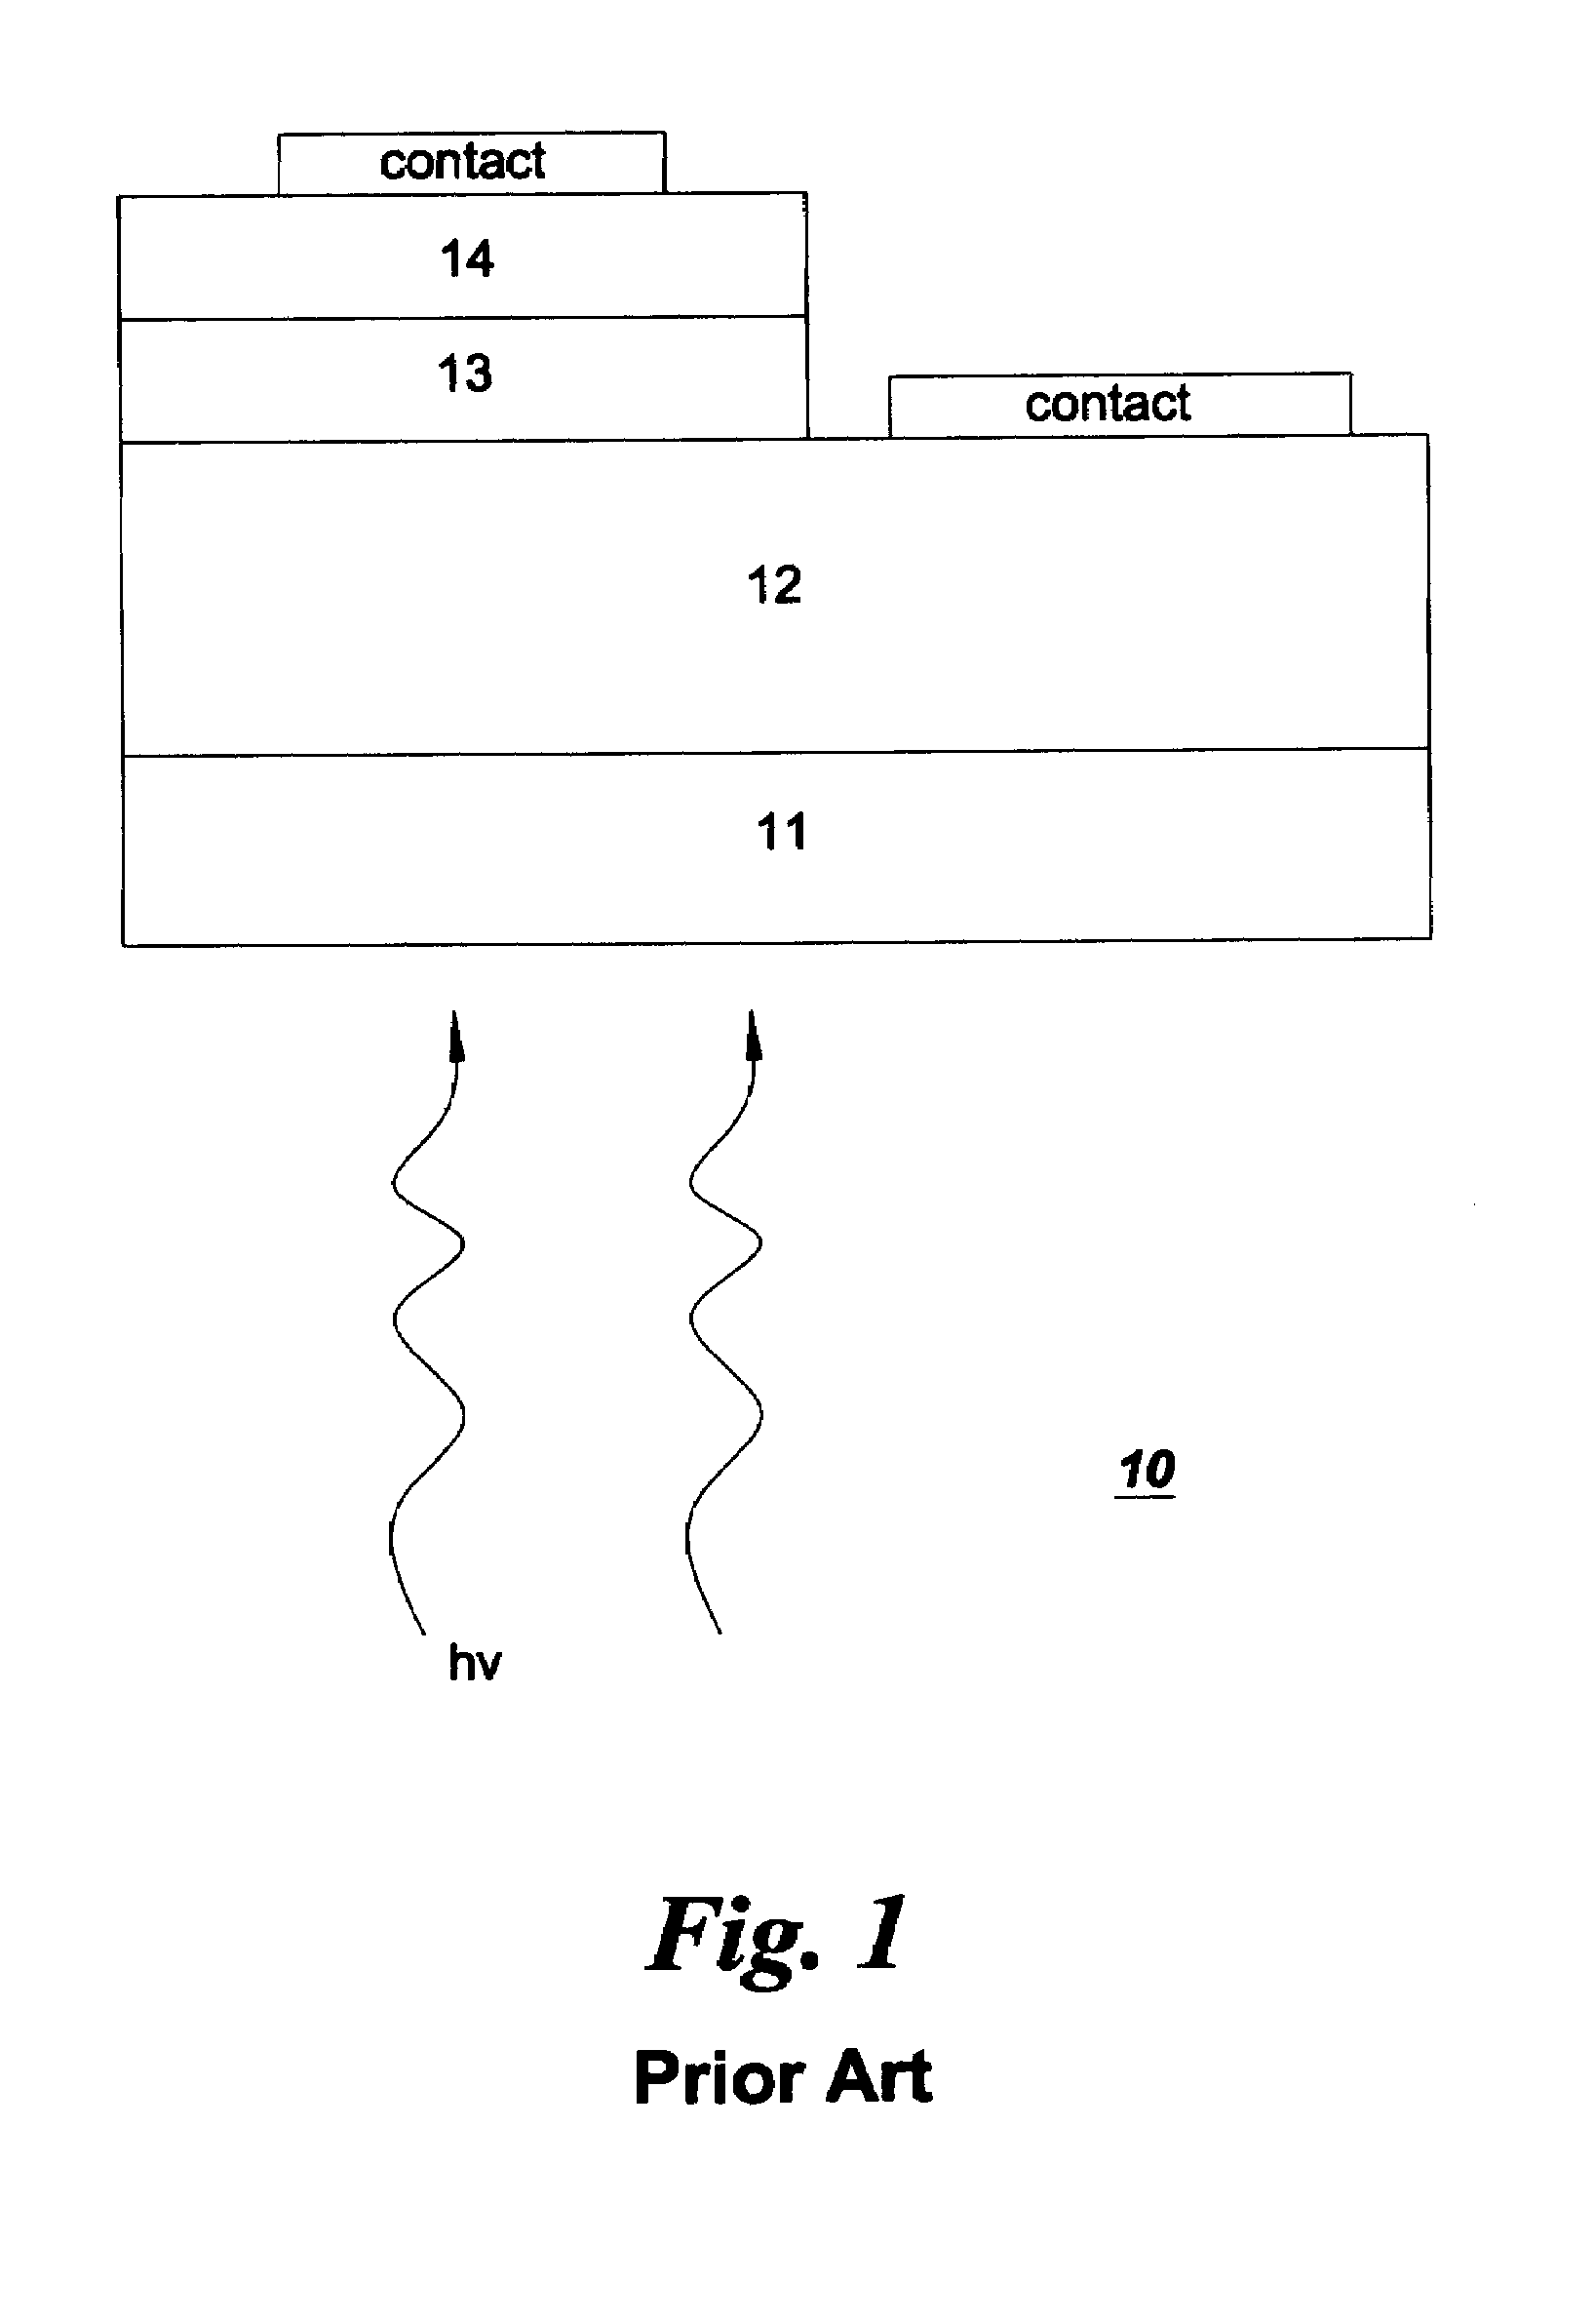 Homoepitaxial gallium nitride based photodetector and method of producing